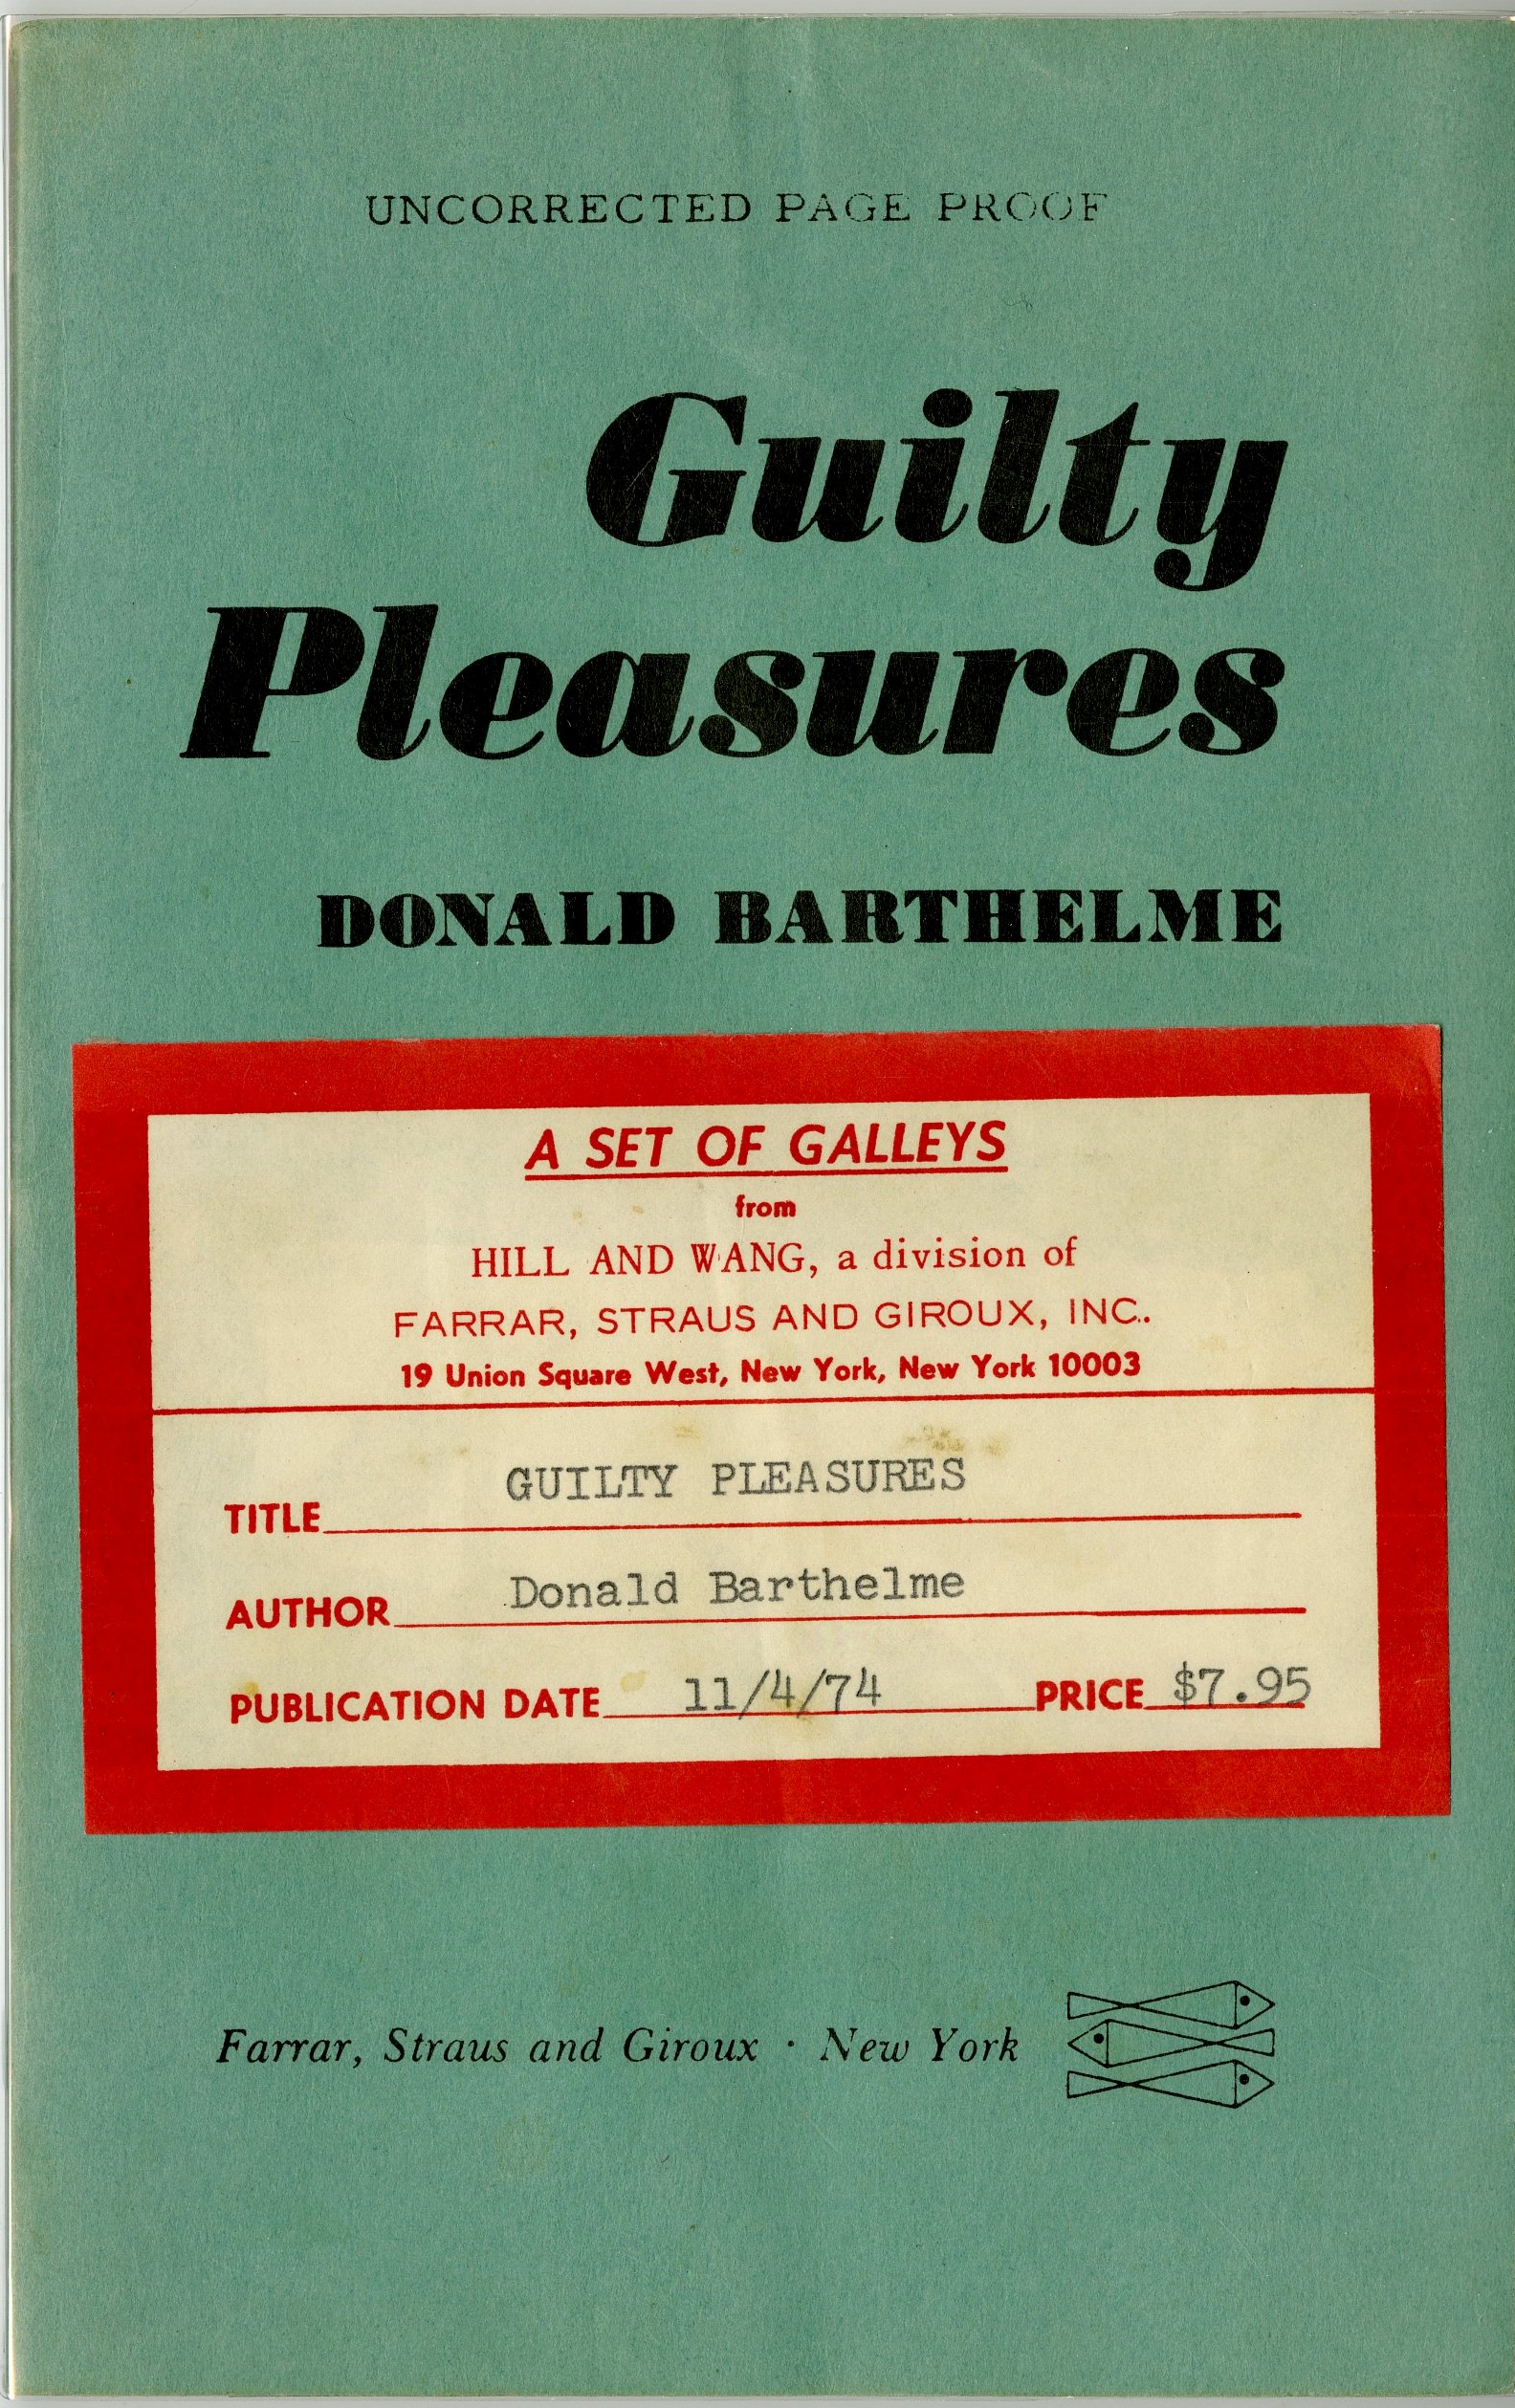 Barthelme, Donald.	Guilty Pleasures. Uncorrected page proof. Farrar, Straus and Giroux, publication date November 4, 1974, from the Donald Barthelme papers